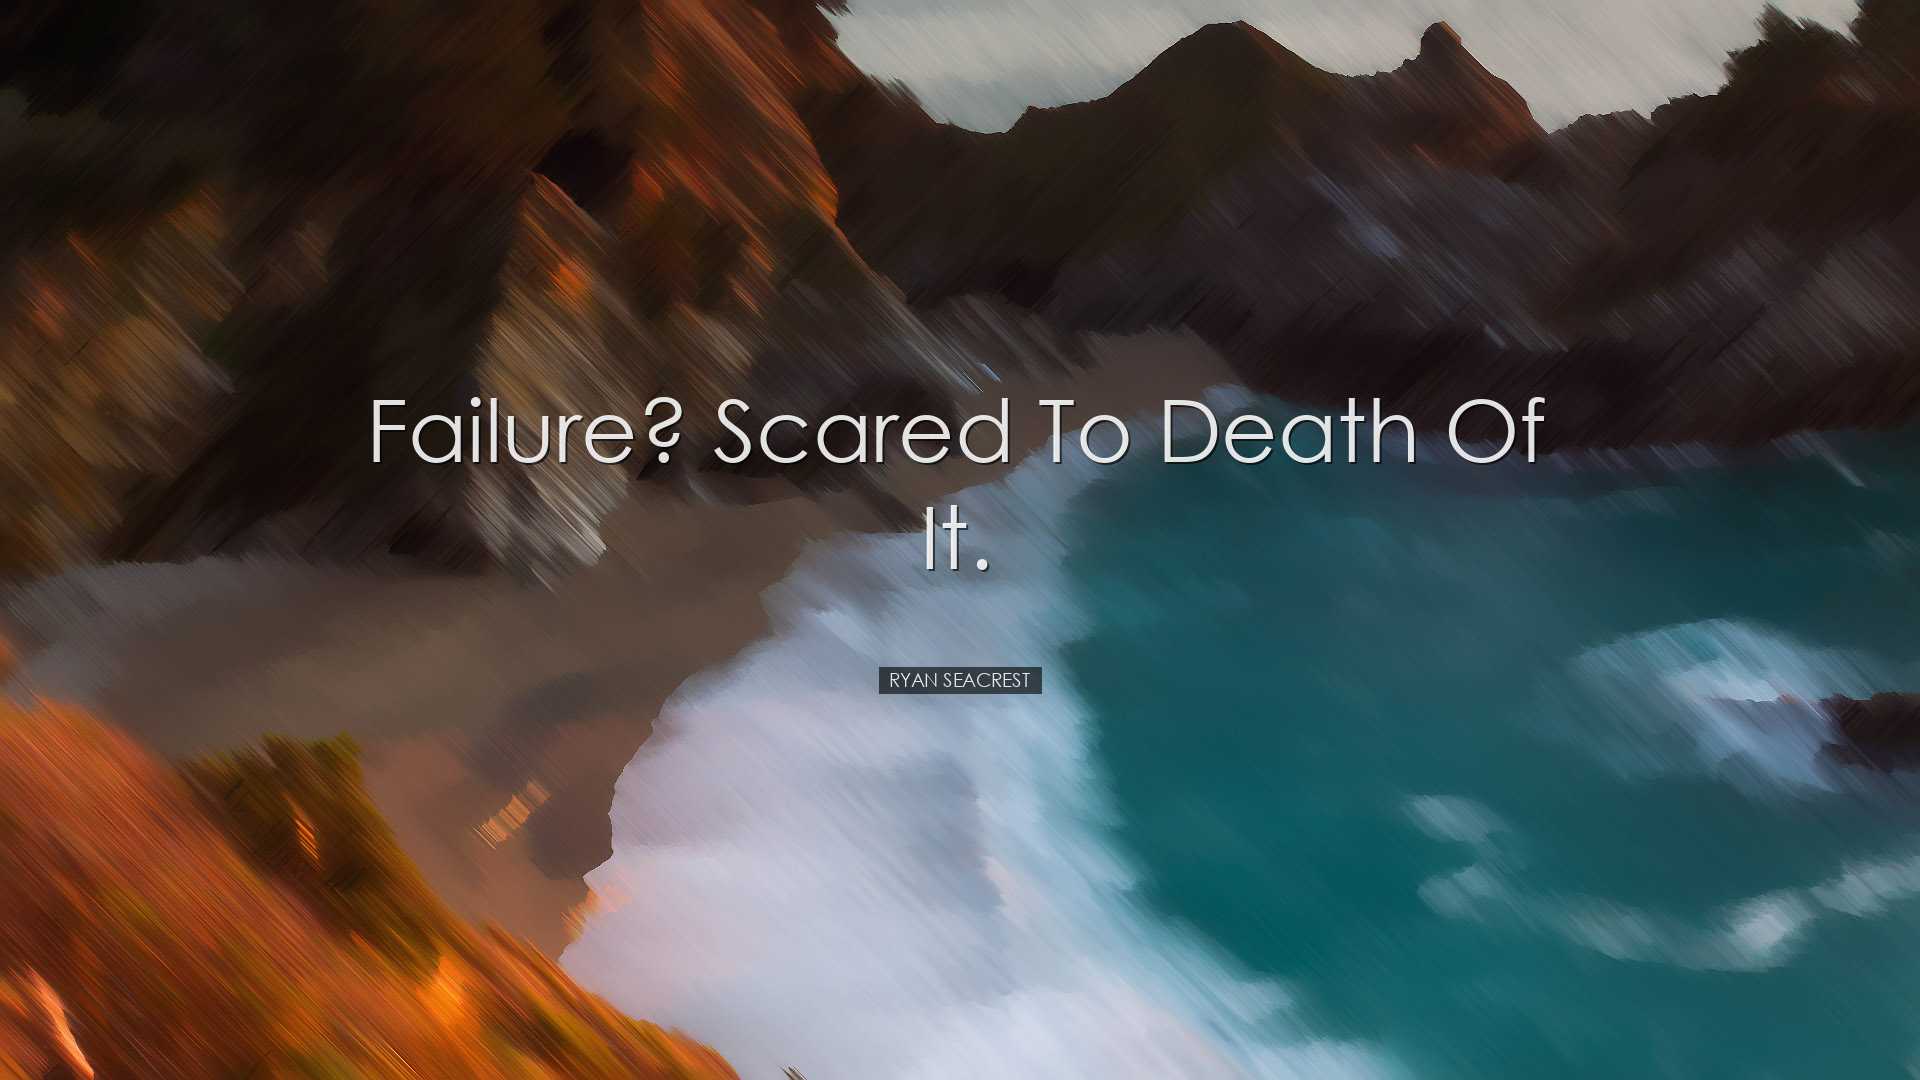 Failure? Scared to death of it. - Ryan Seacrest